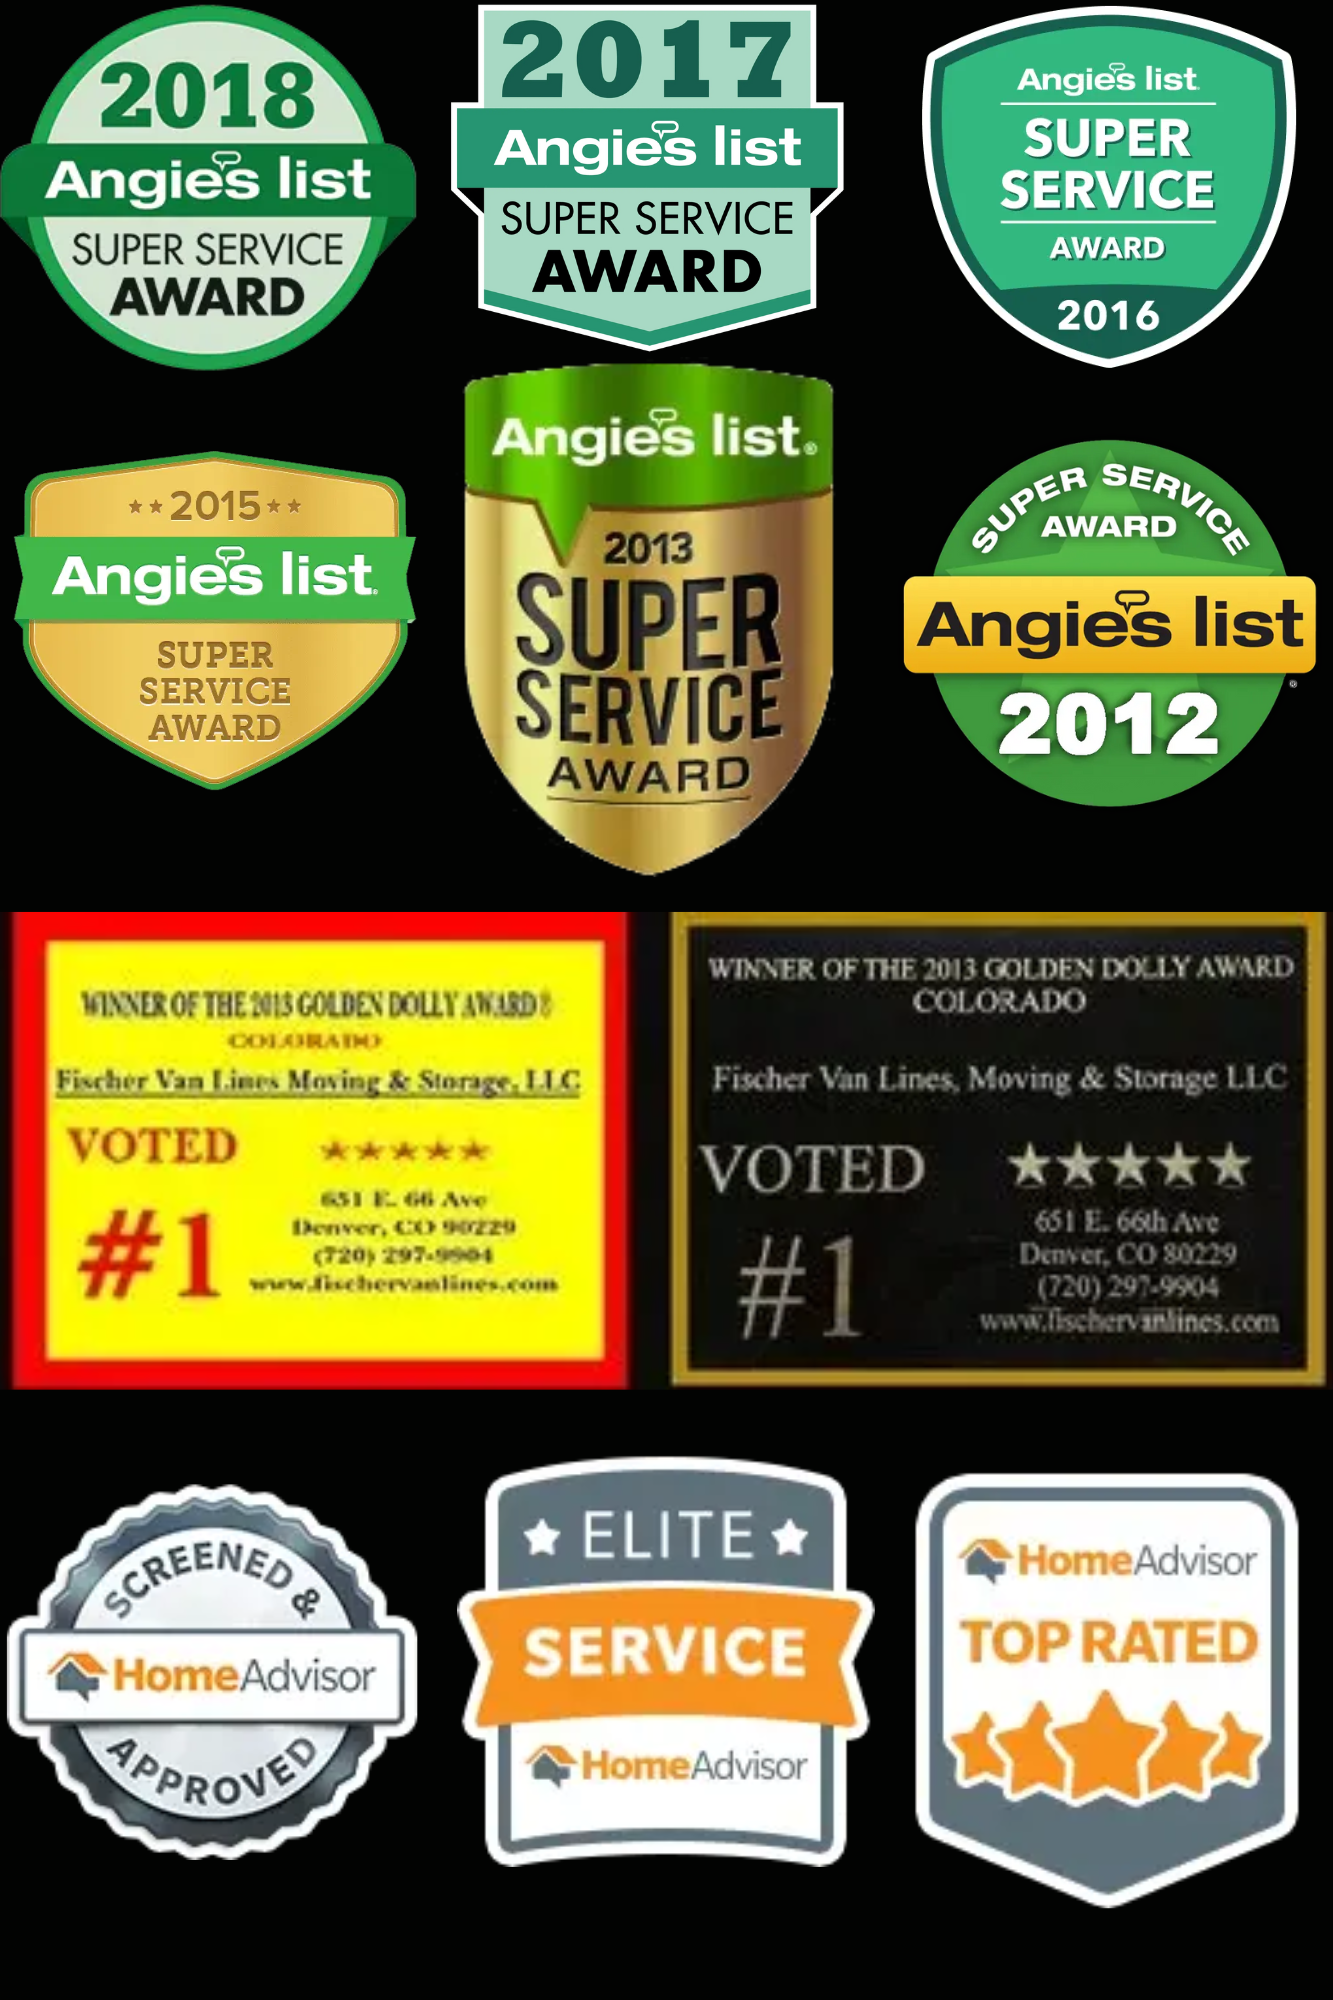 Fischer Van Lines, Denver Moving Company LLC Reviews for Angie's List and Home Advisor.